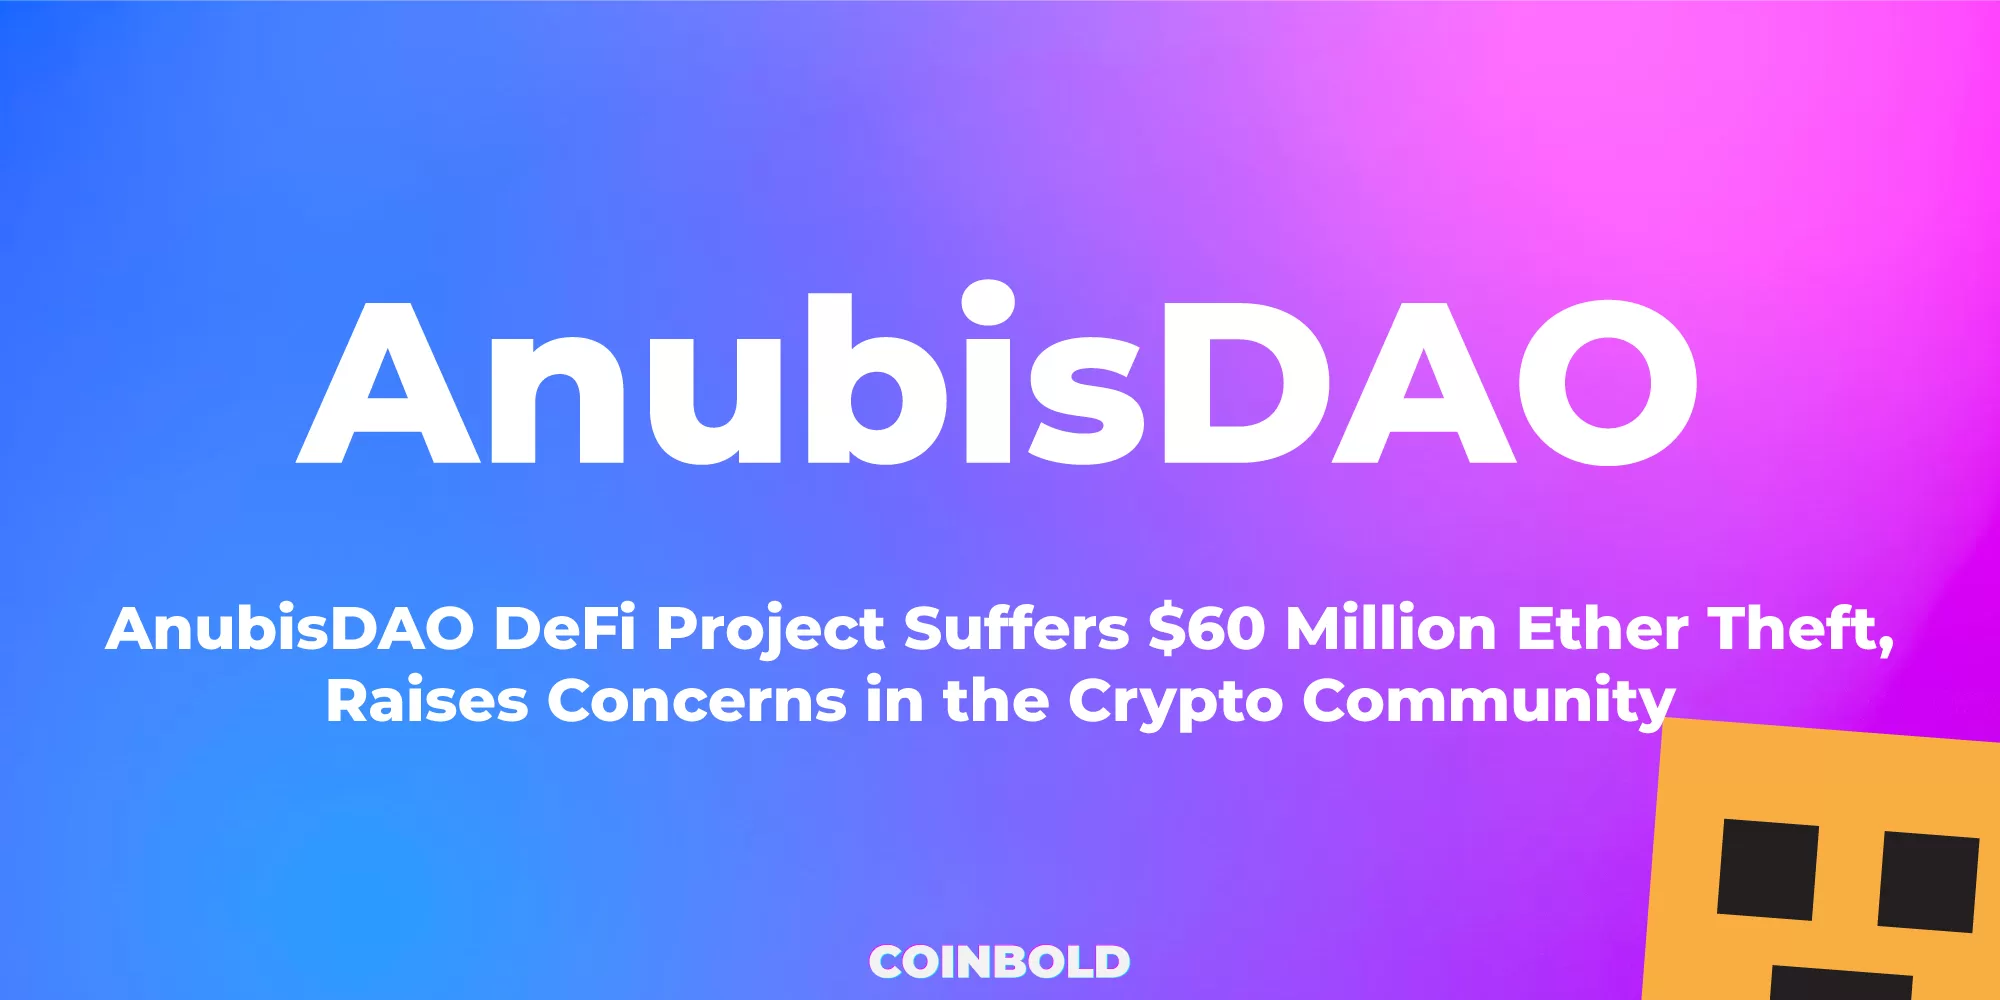 AnubisDAO DeFi Project Suffers $60 Million Ether Theft